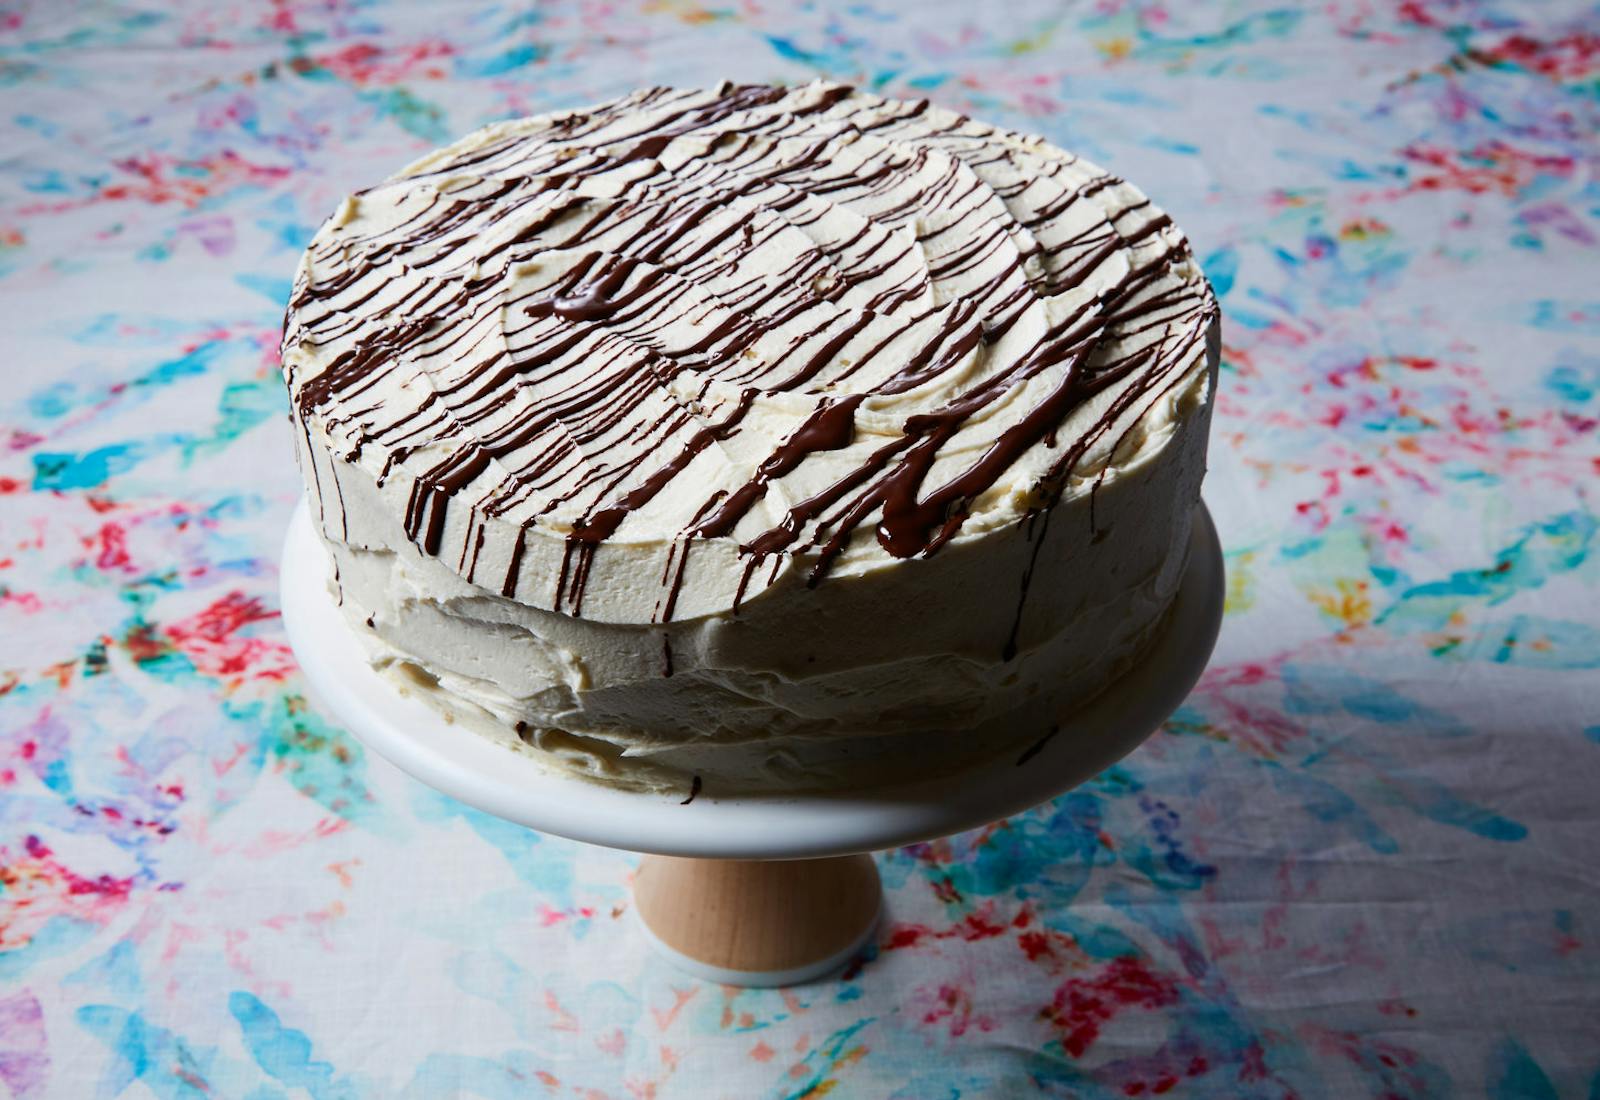 Chocolate cake with vanilla icing and chocolate drizzle on cake tray atop tie-dyed tablecloth.